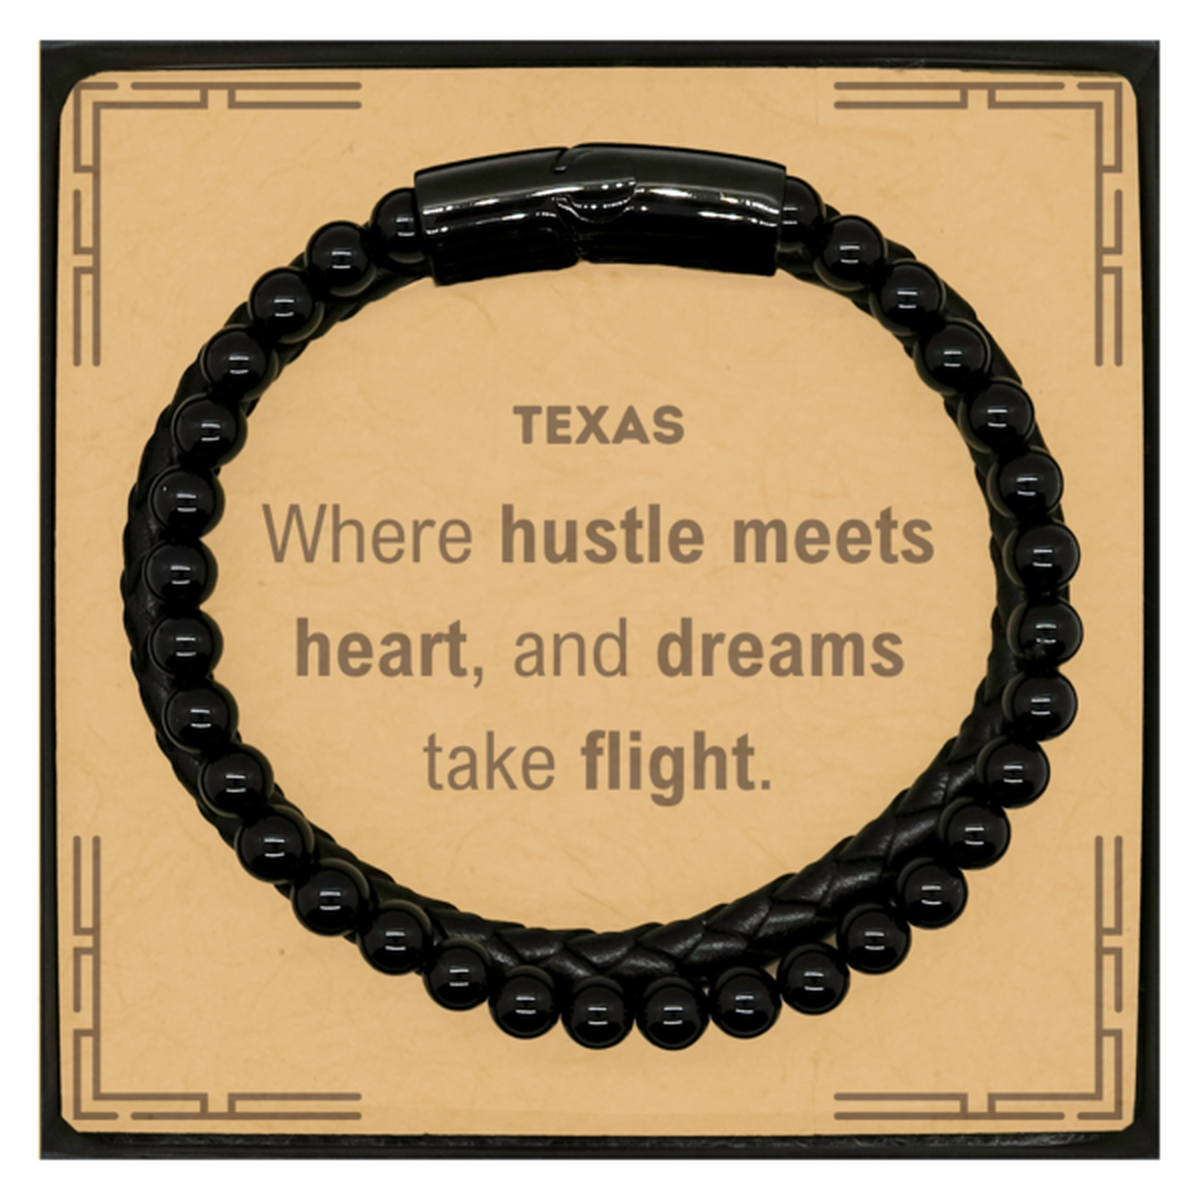 Texas: Where hustle meets heart, and dreams take flight, Texas Card Gifts, Proud Texas Christmas Birthday Texas Stone Leather Bracelets, Texas State People, Men, Women, Friends